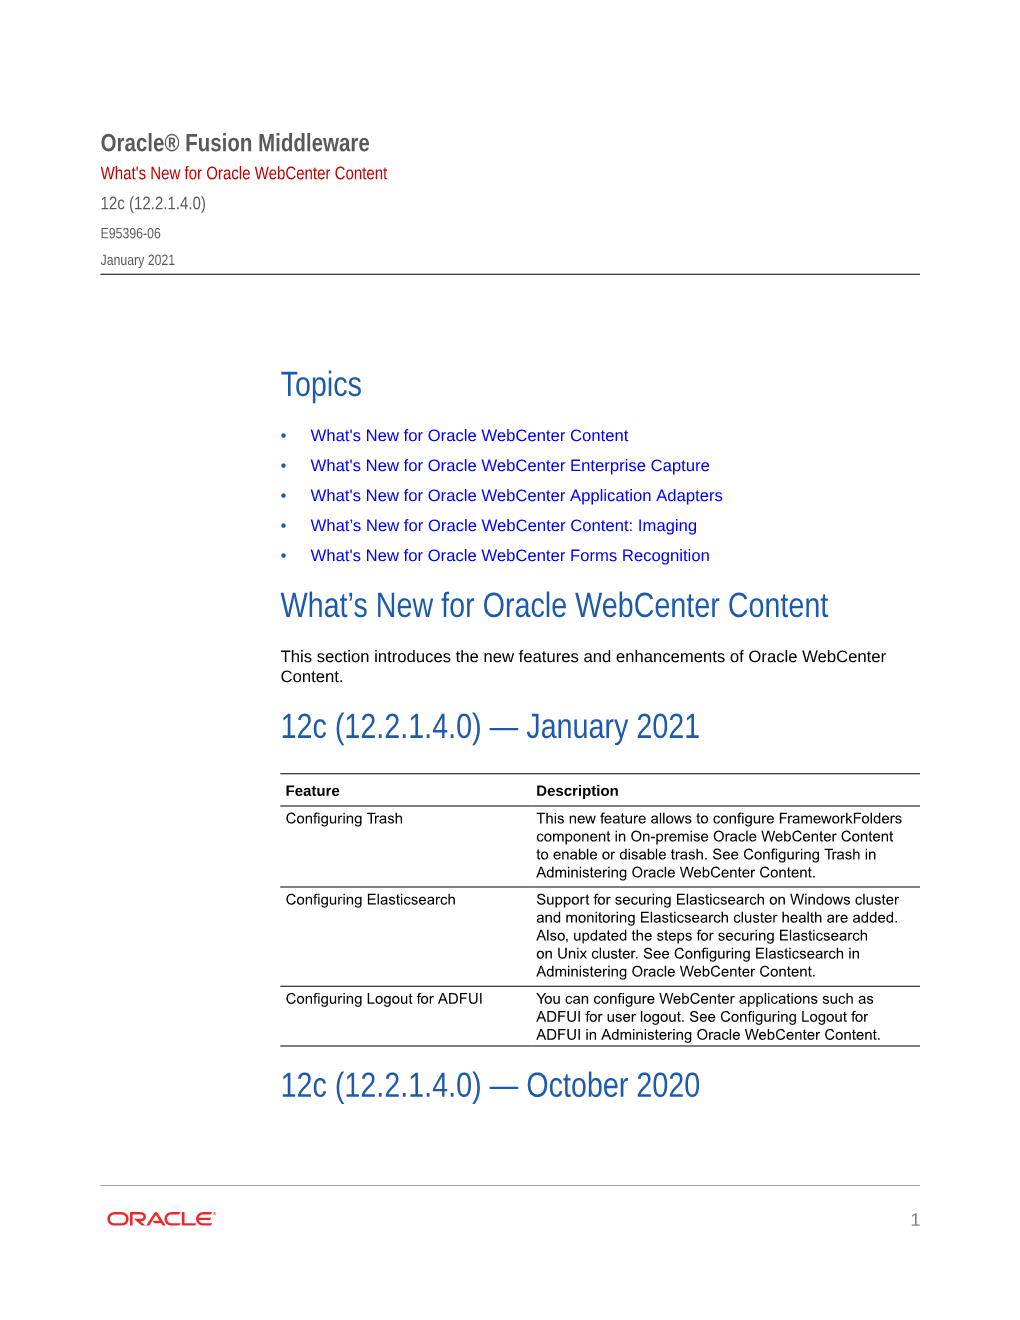 What's New for Oracle Webcenter Content 12C (12.2.1.4.0) E95396-06 January 2021